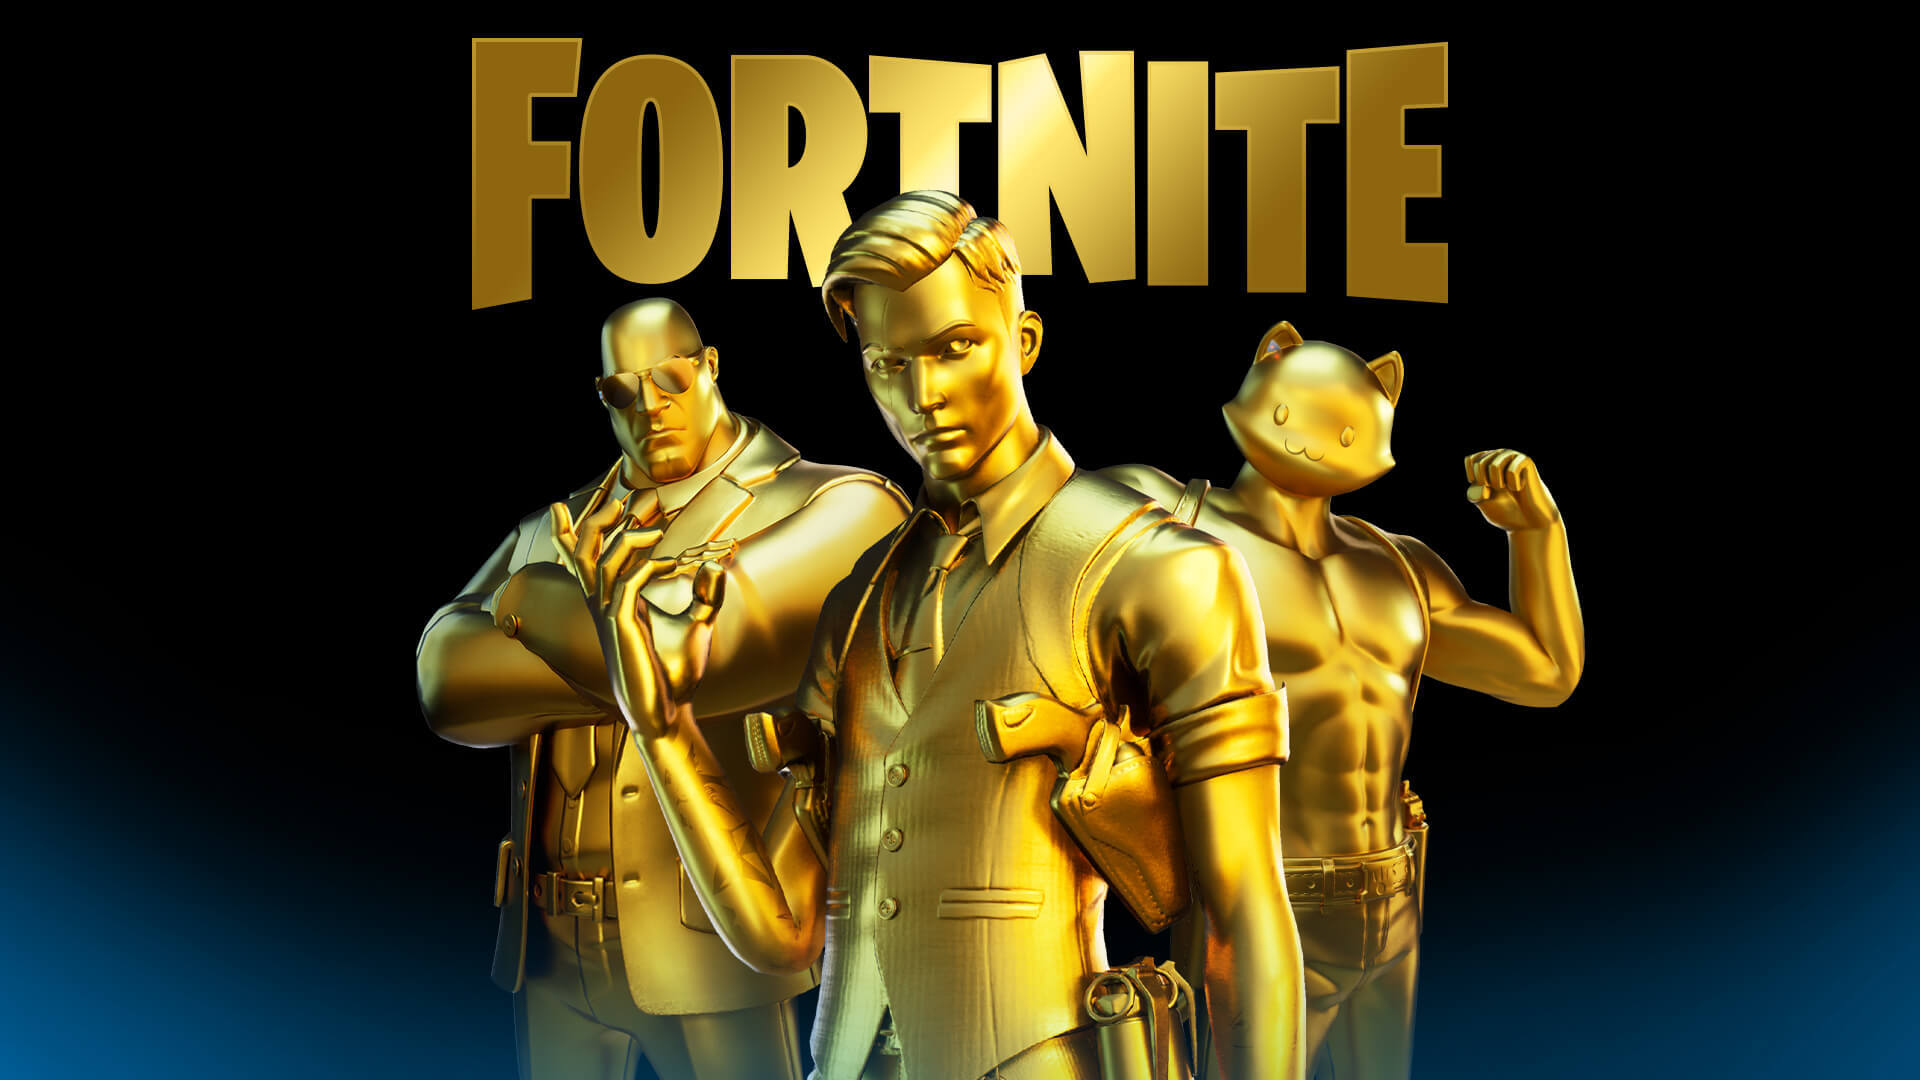 30% store tax is a high cost,” says Sweeney as Fortnite skips Google Play